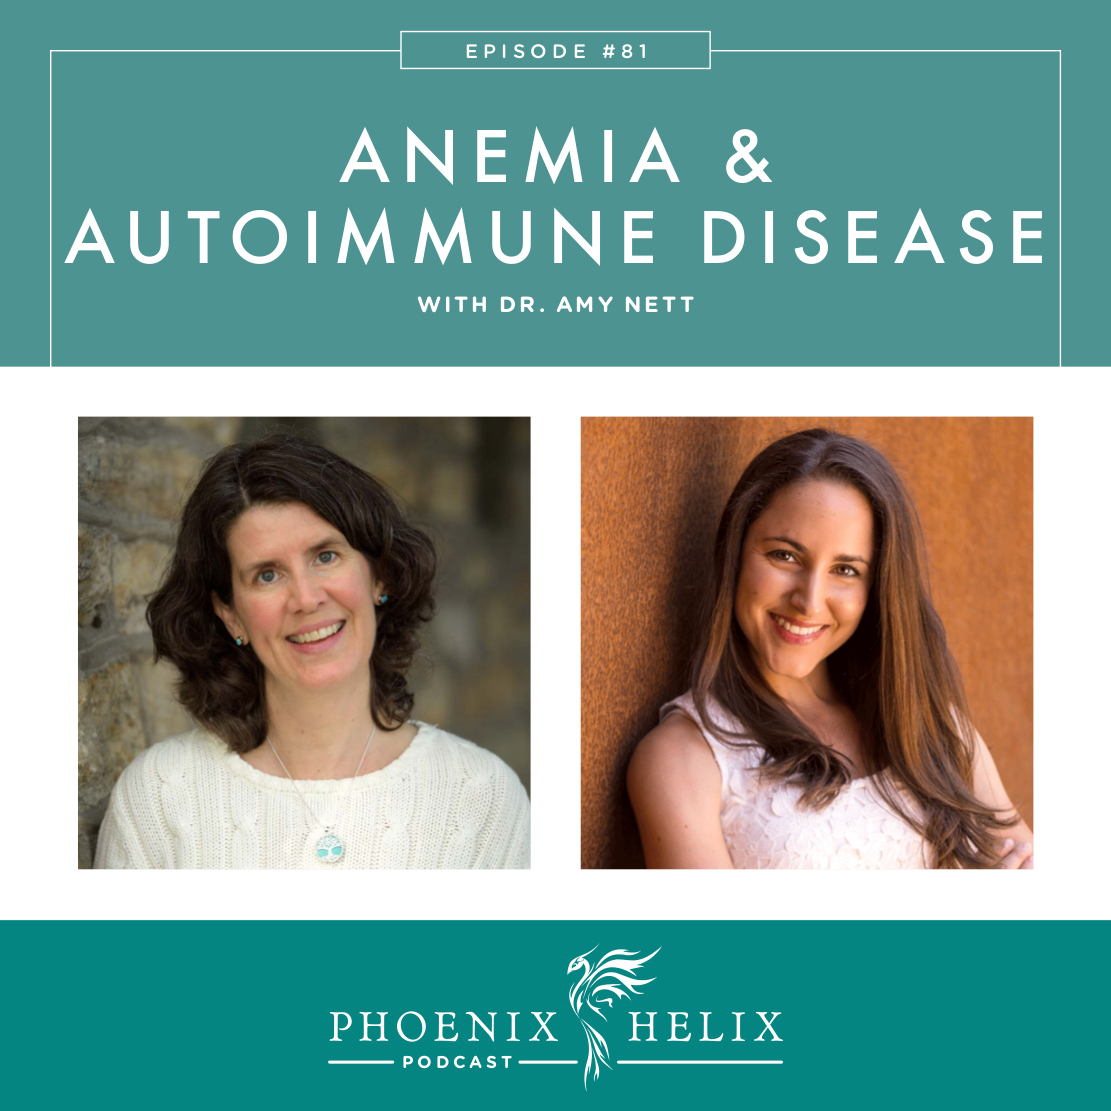 Anemia and Autoimmune Disease with Dr. Amy Nett | Phoenix Helix Podcast